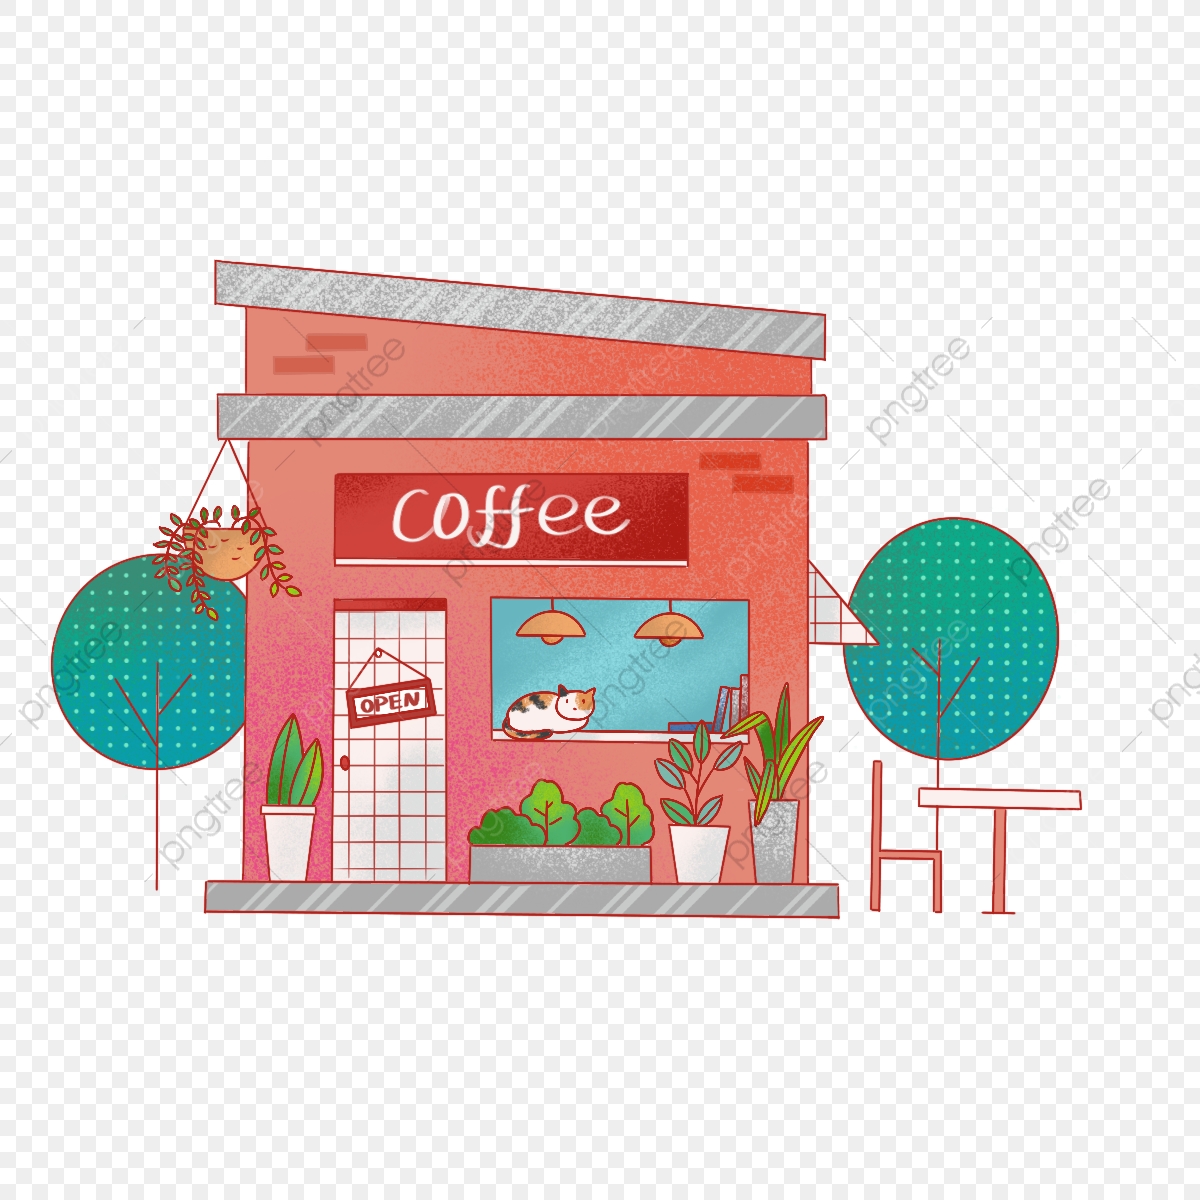 cafe clipart cute cafe